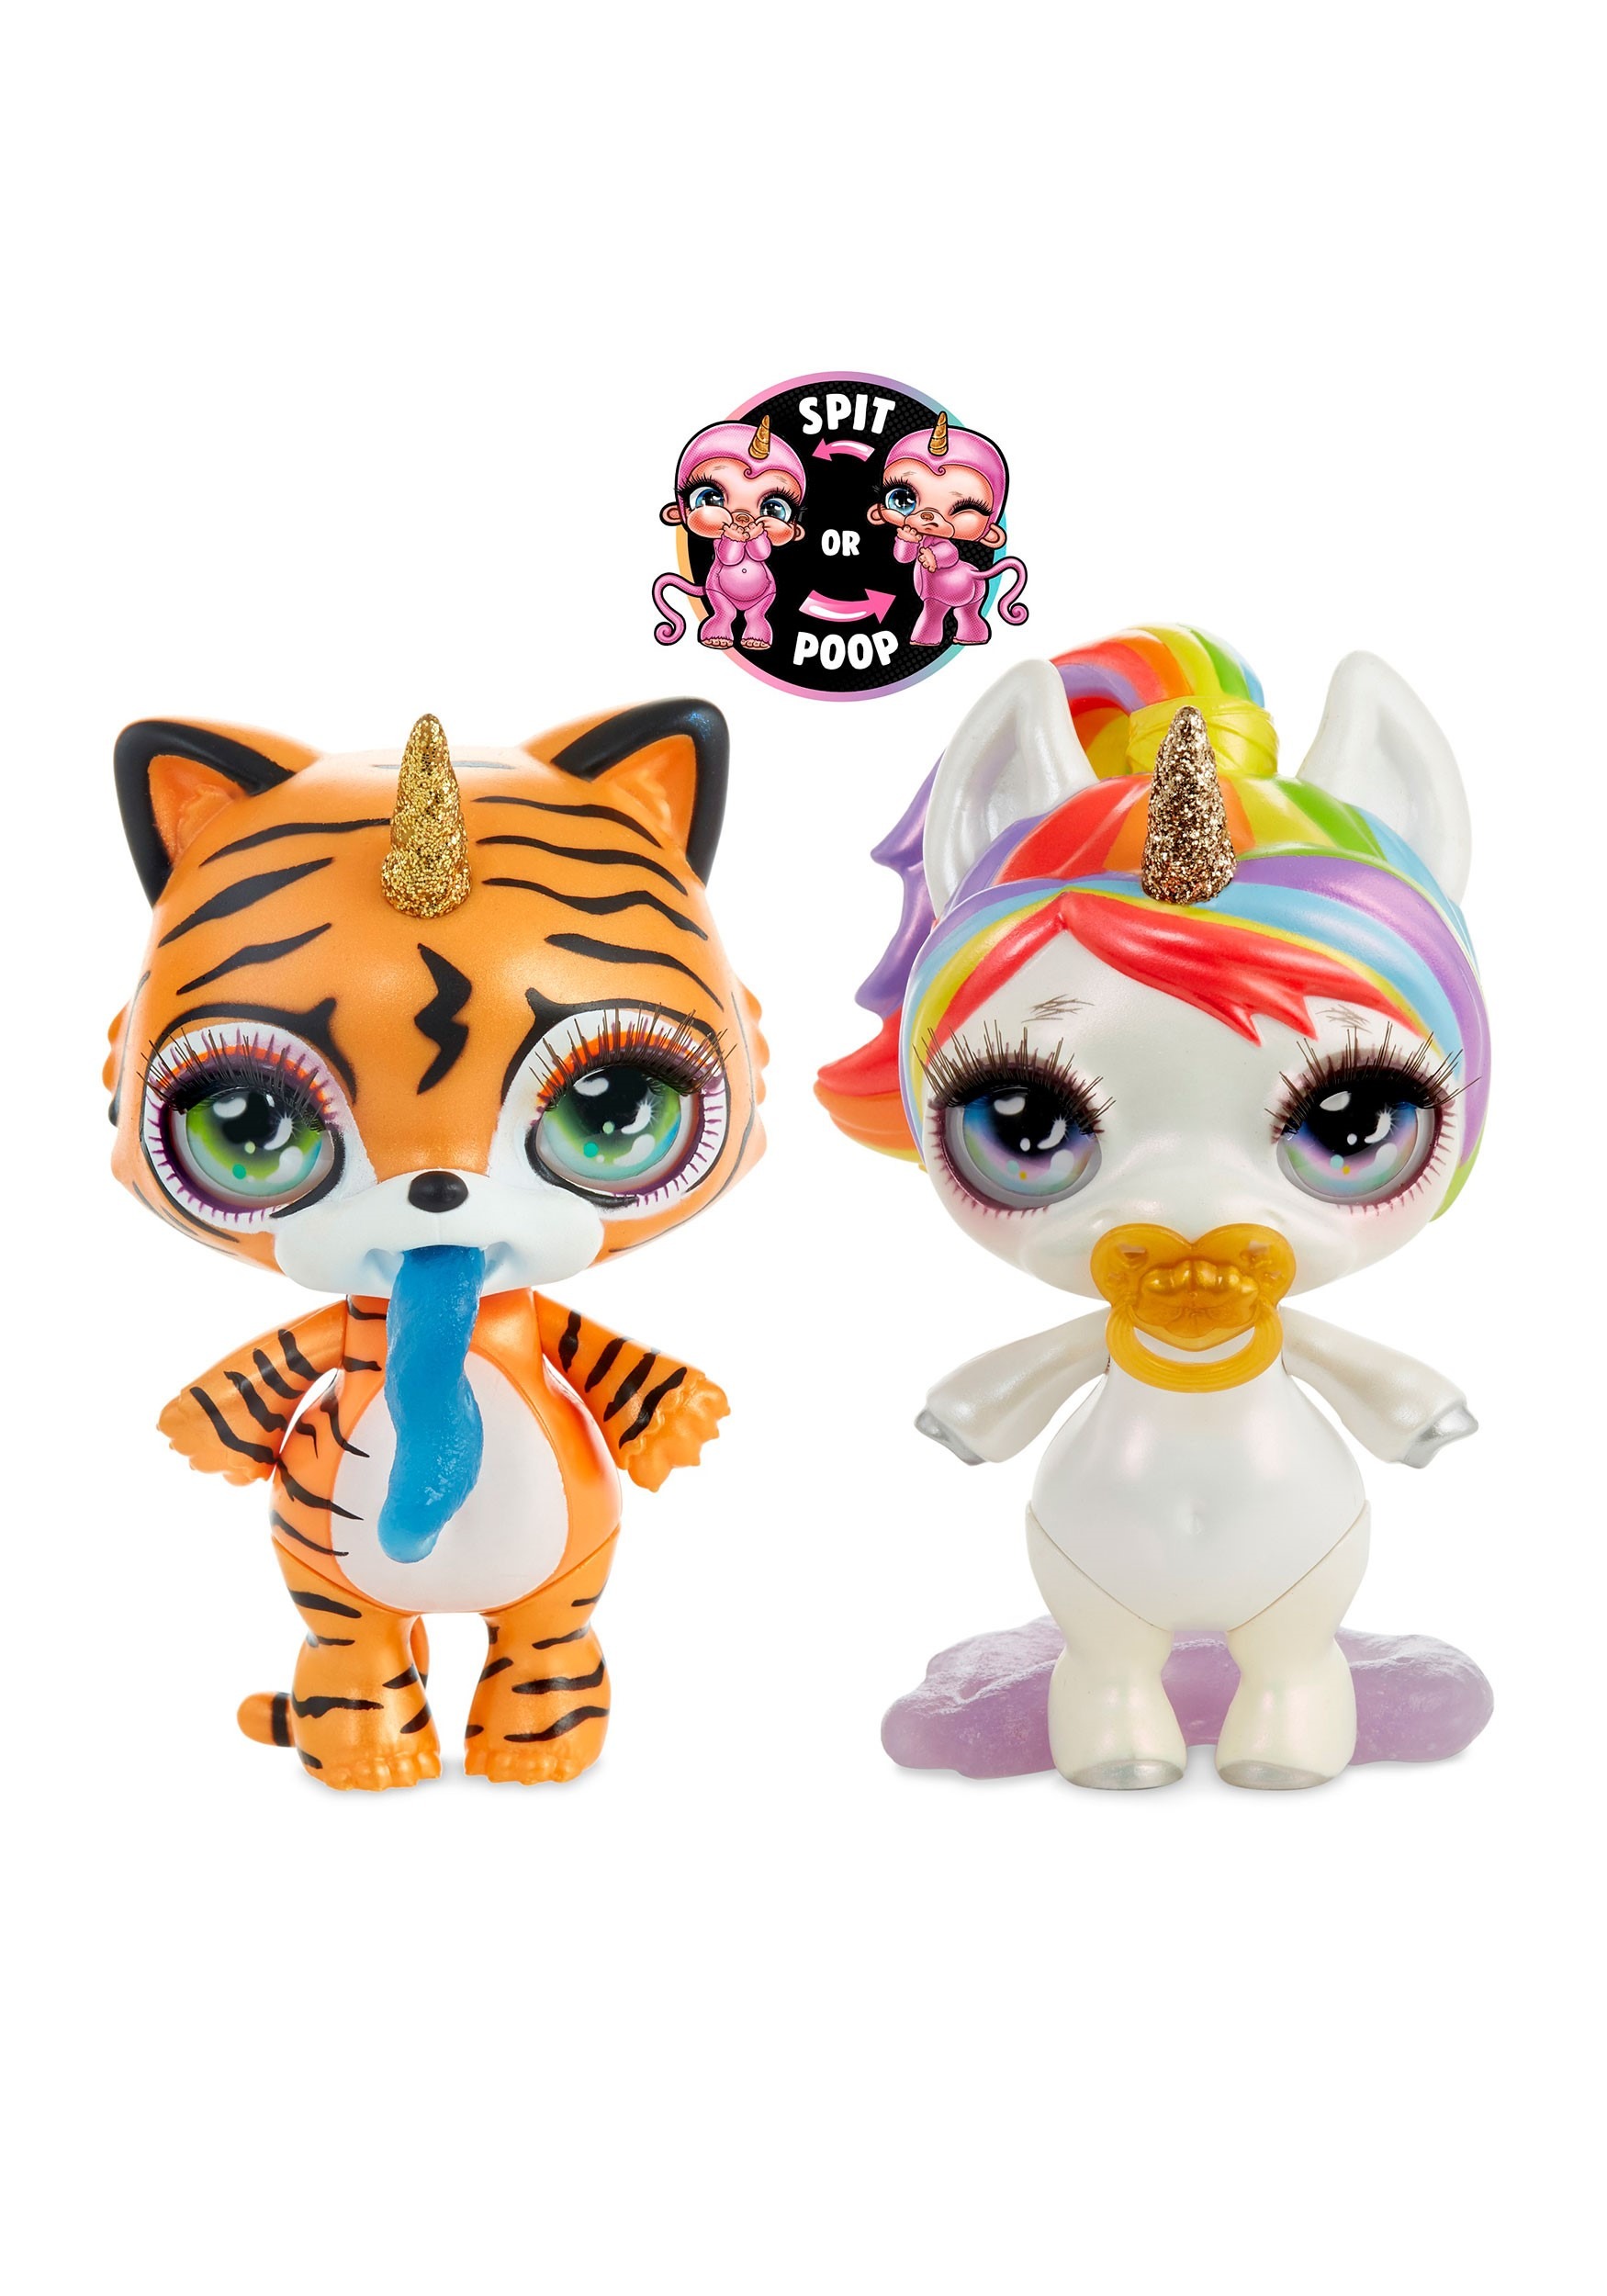 poopsie sparkly critters toys